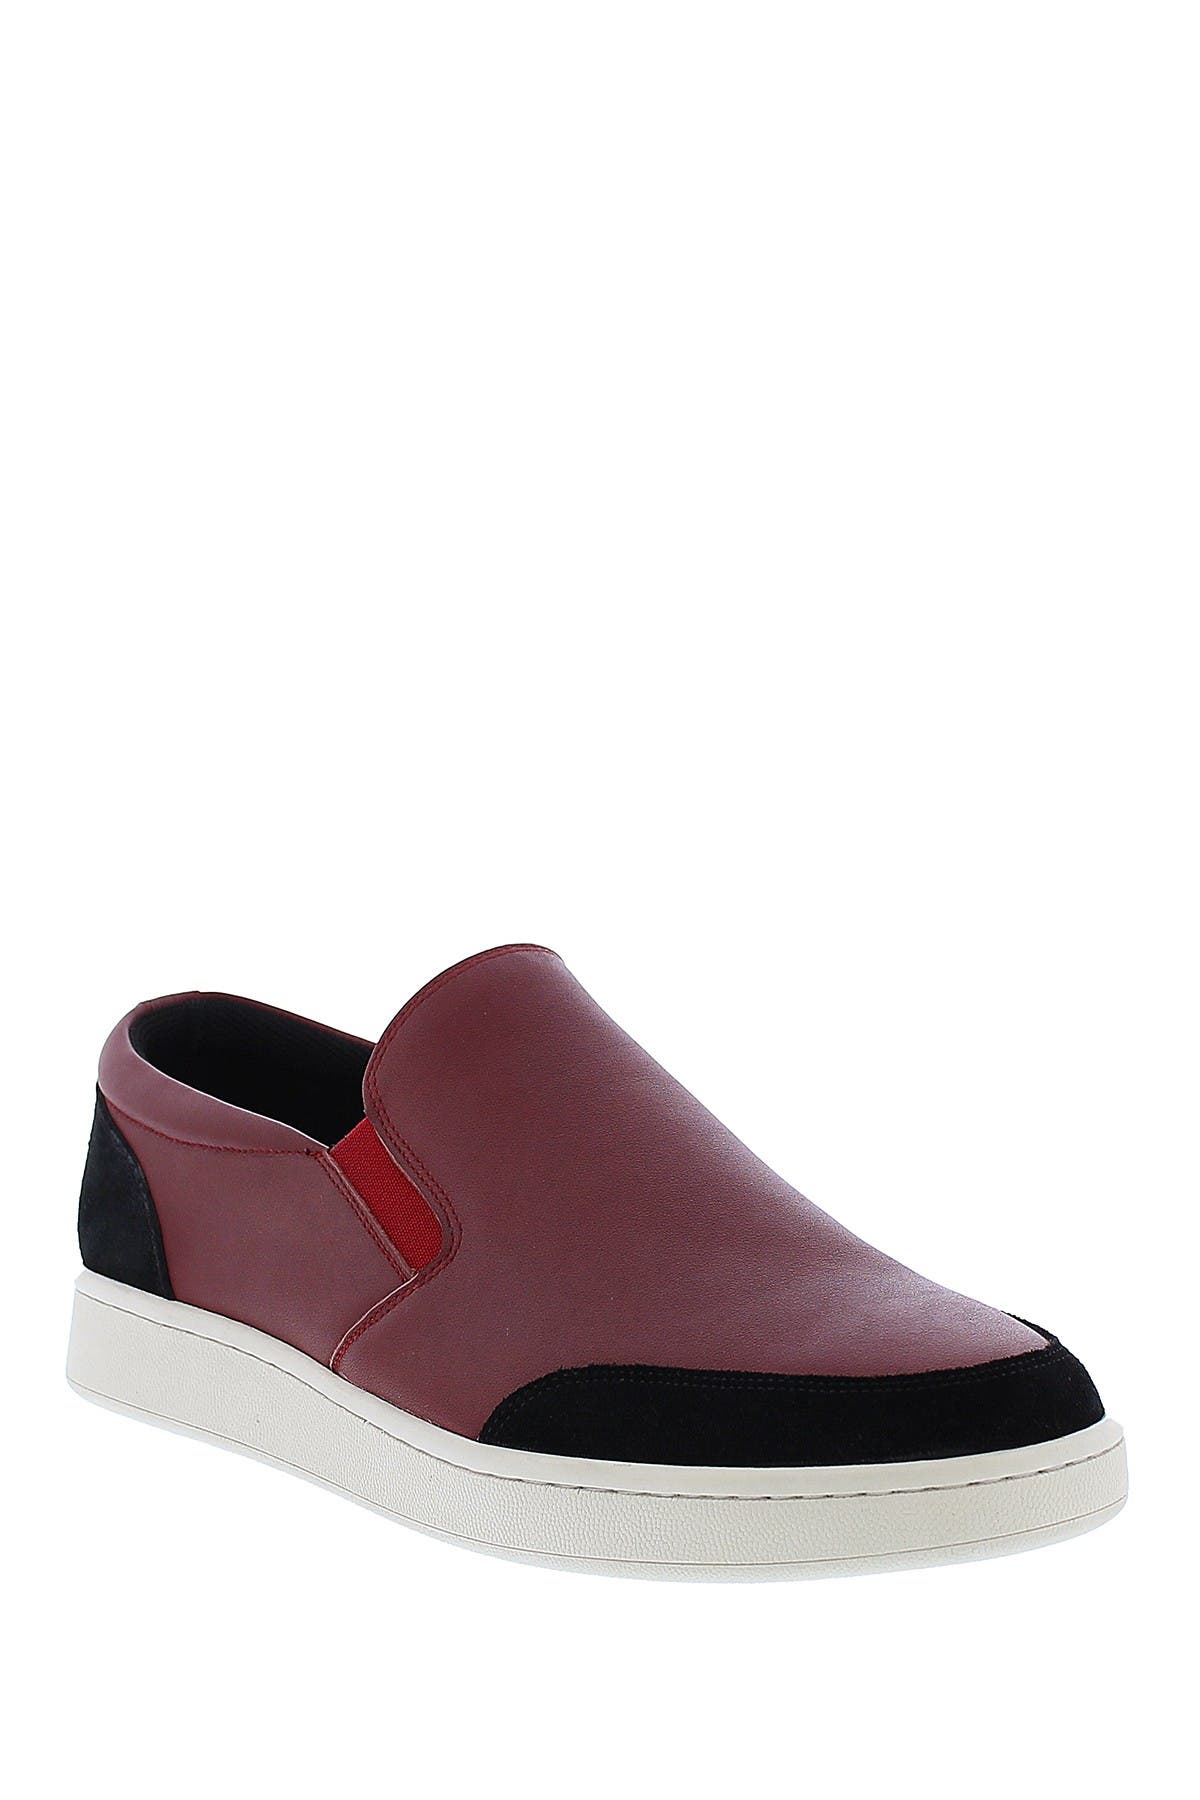 English Laundry High Sneaker In Wine